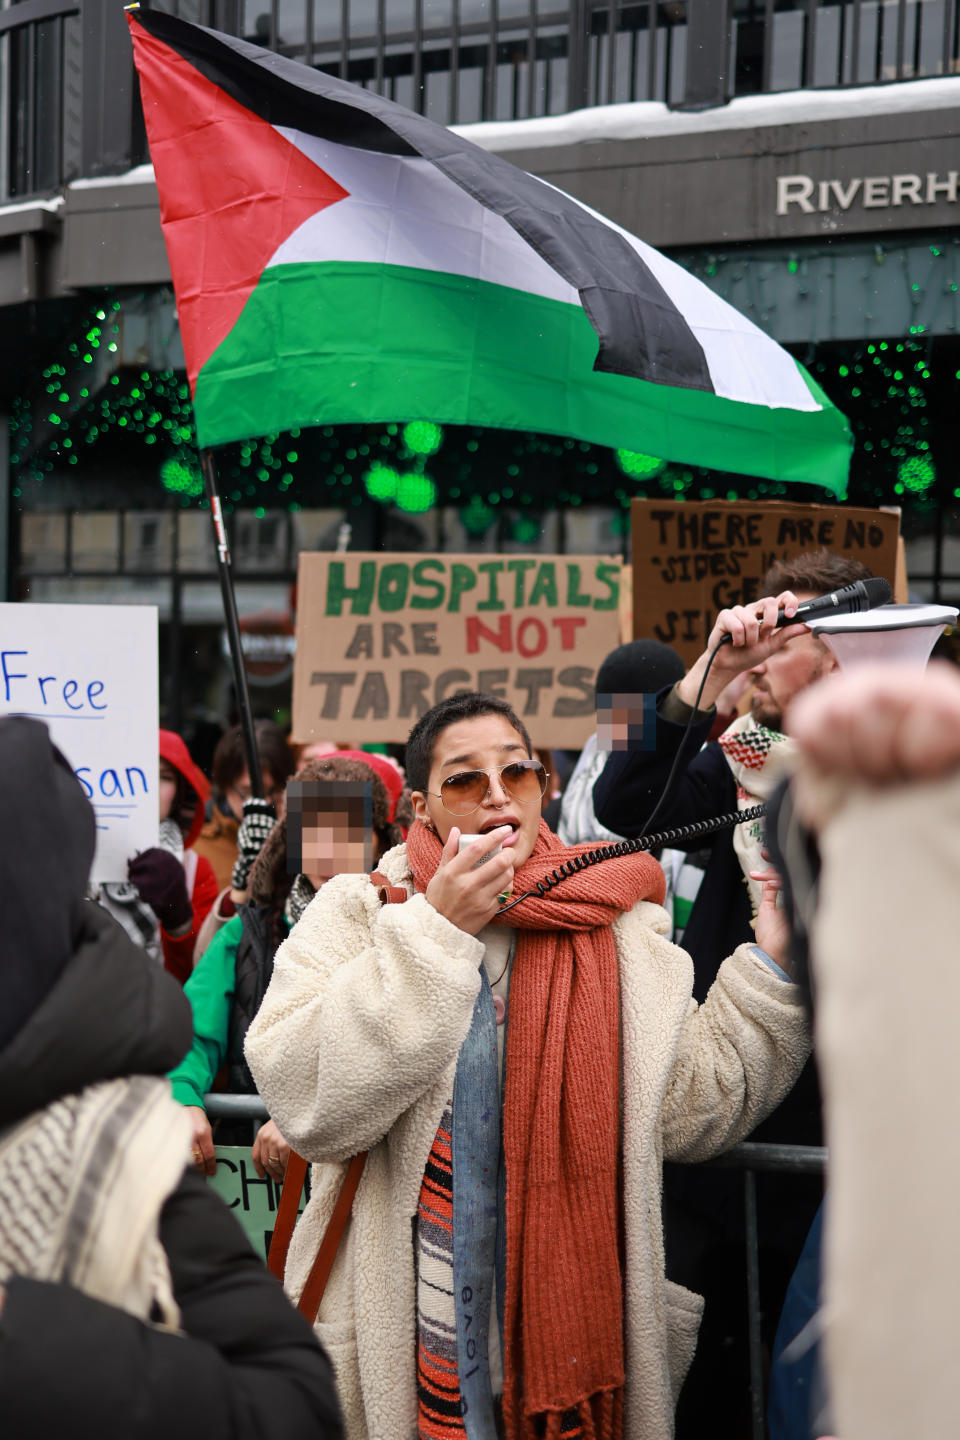 Protestors holding signs and Palestinian flags, with one woman in the front using a megaphone. Signs read, "Free" and "Hospitals Are Not Targets."